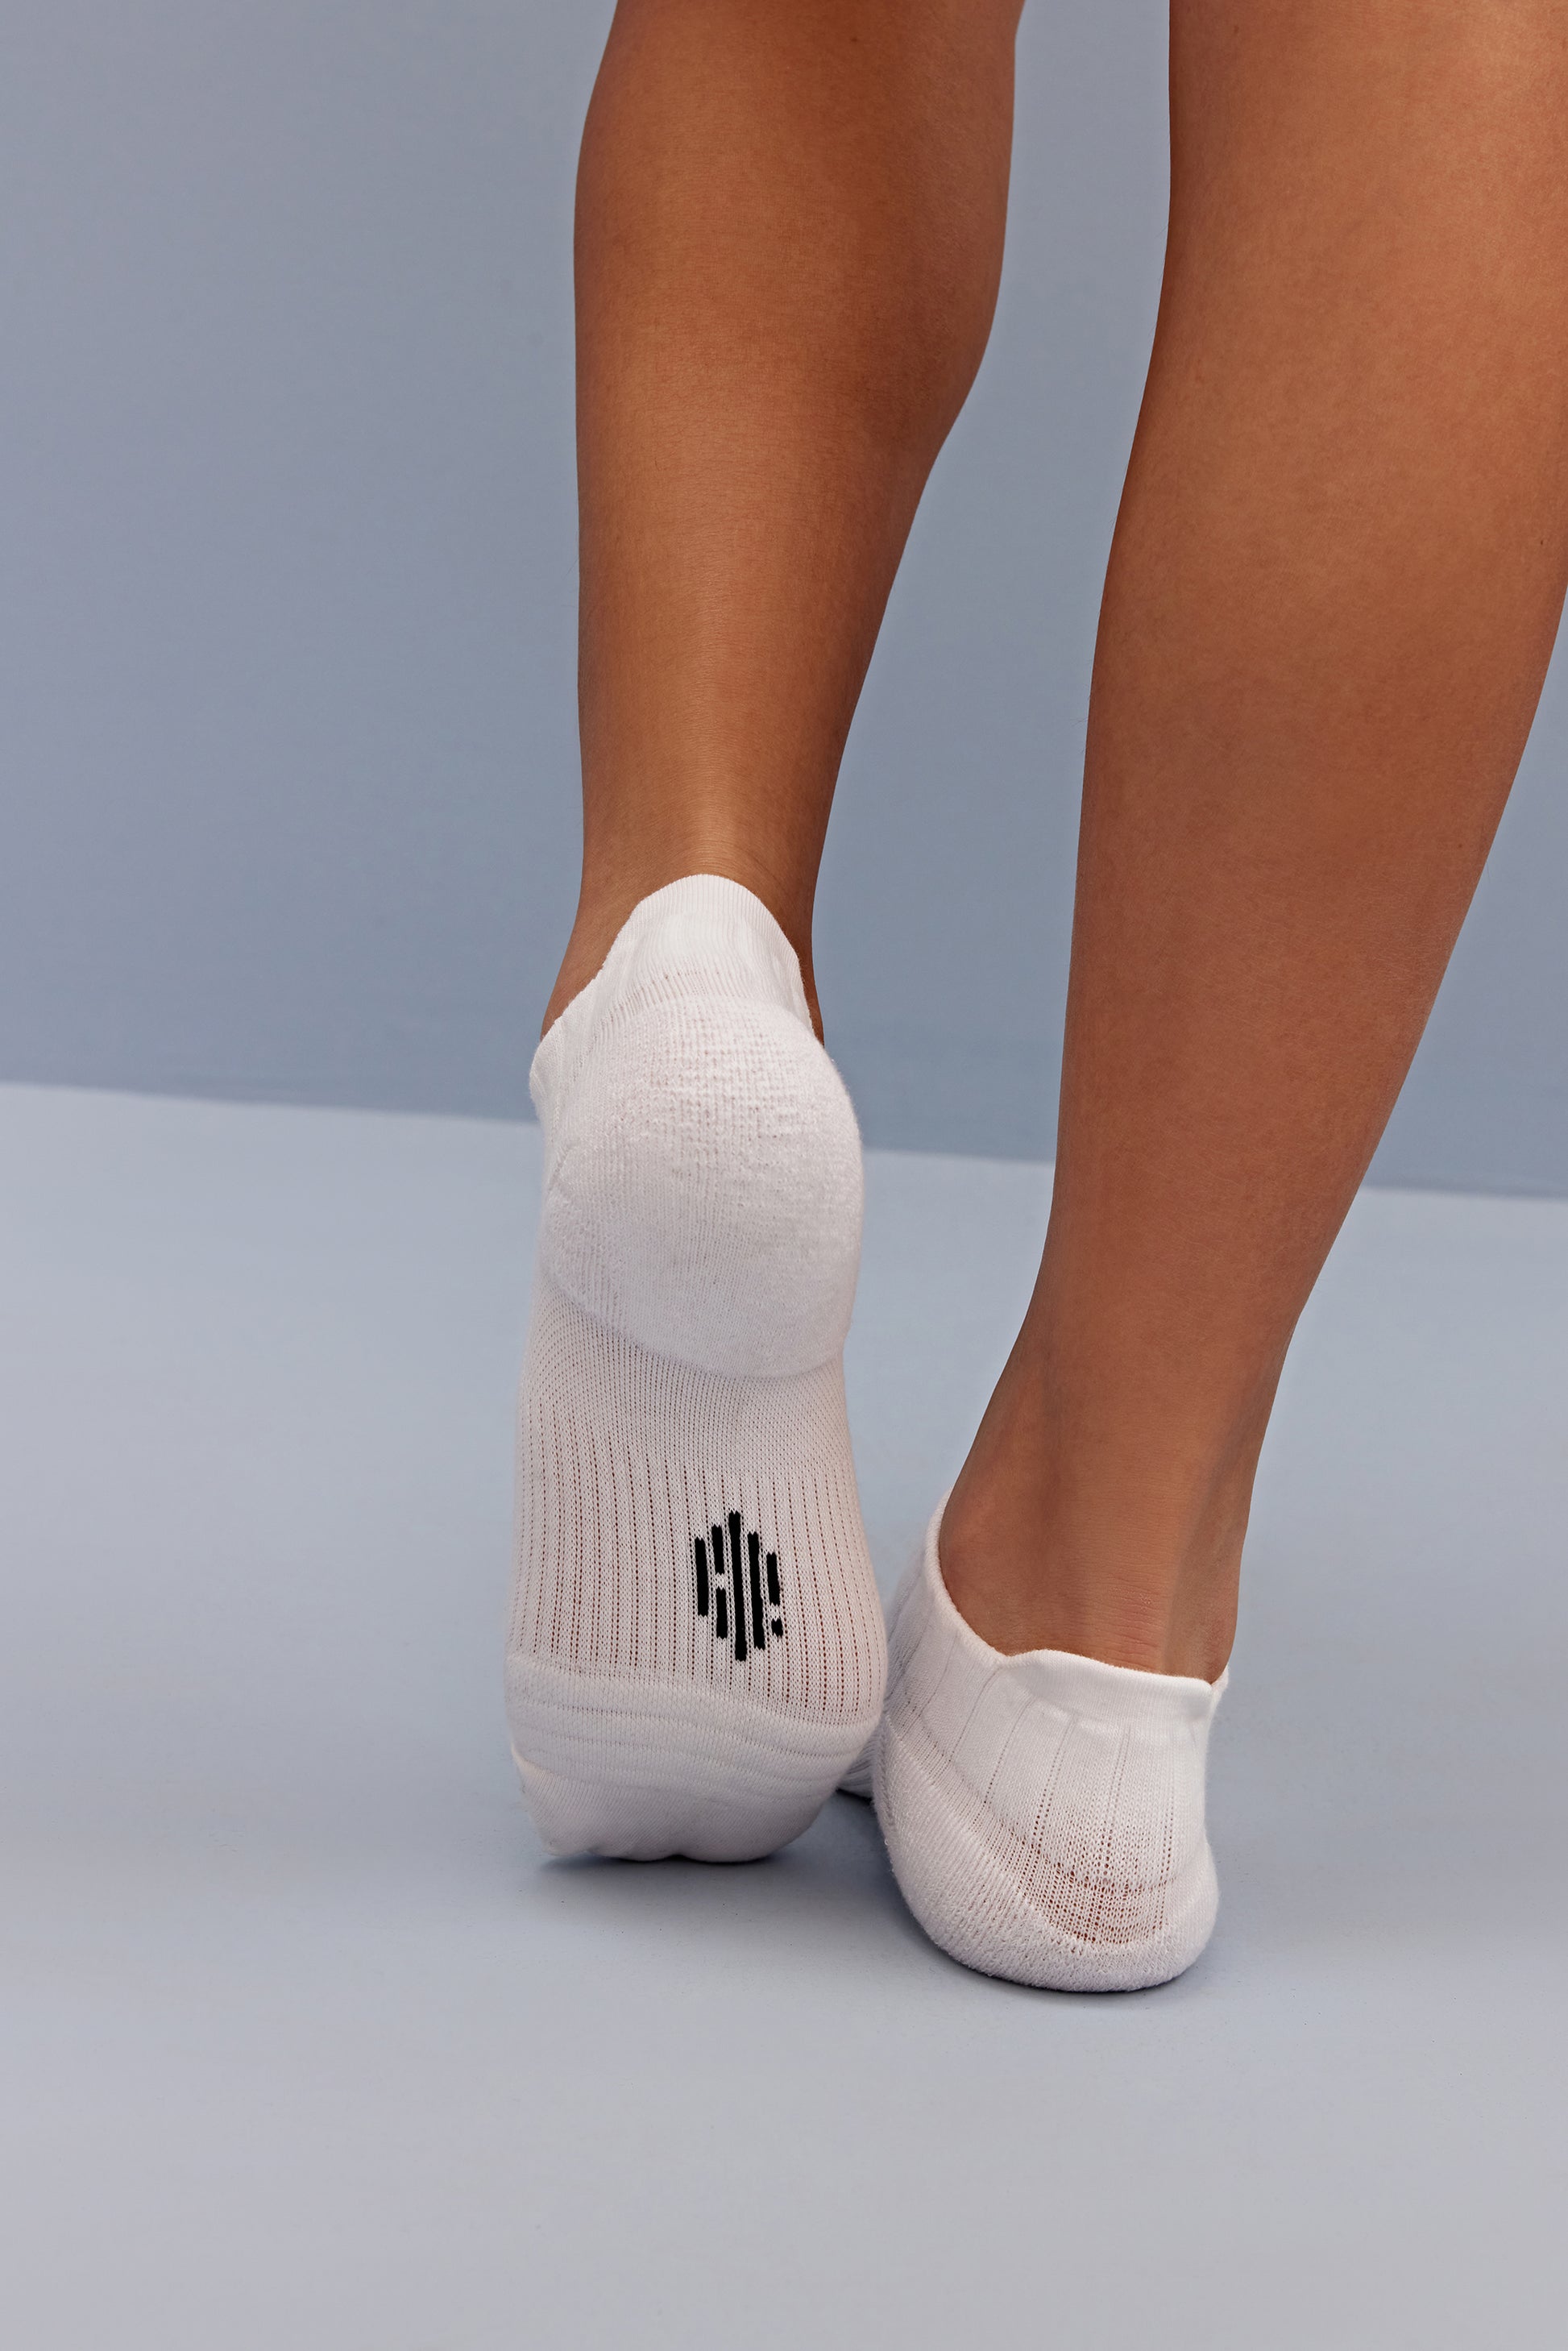 a person wearing white socks, lifting left foot to show the neiwai active logo